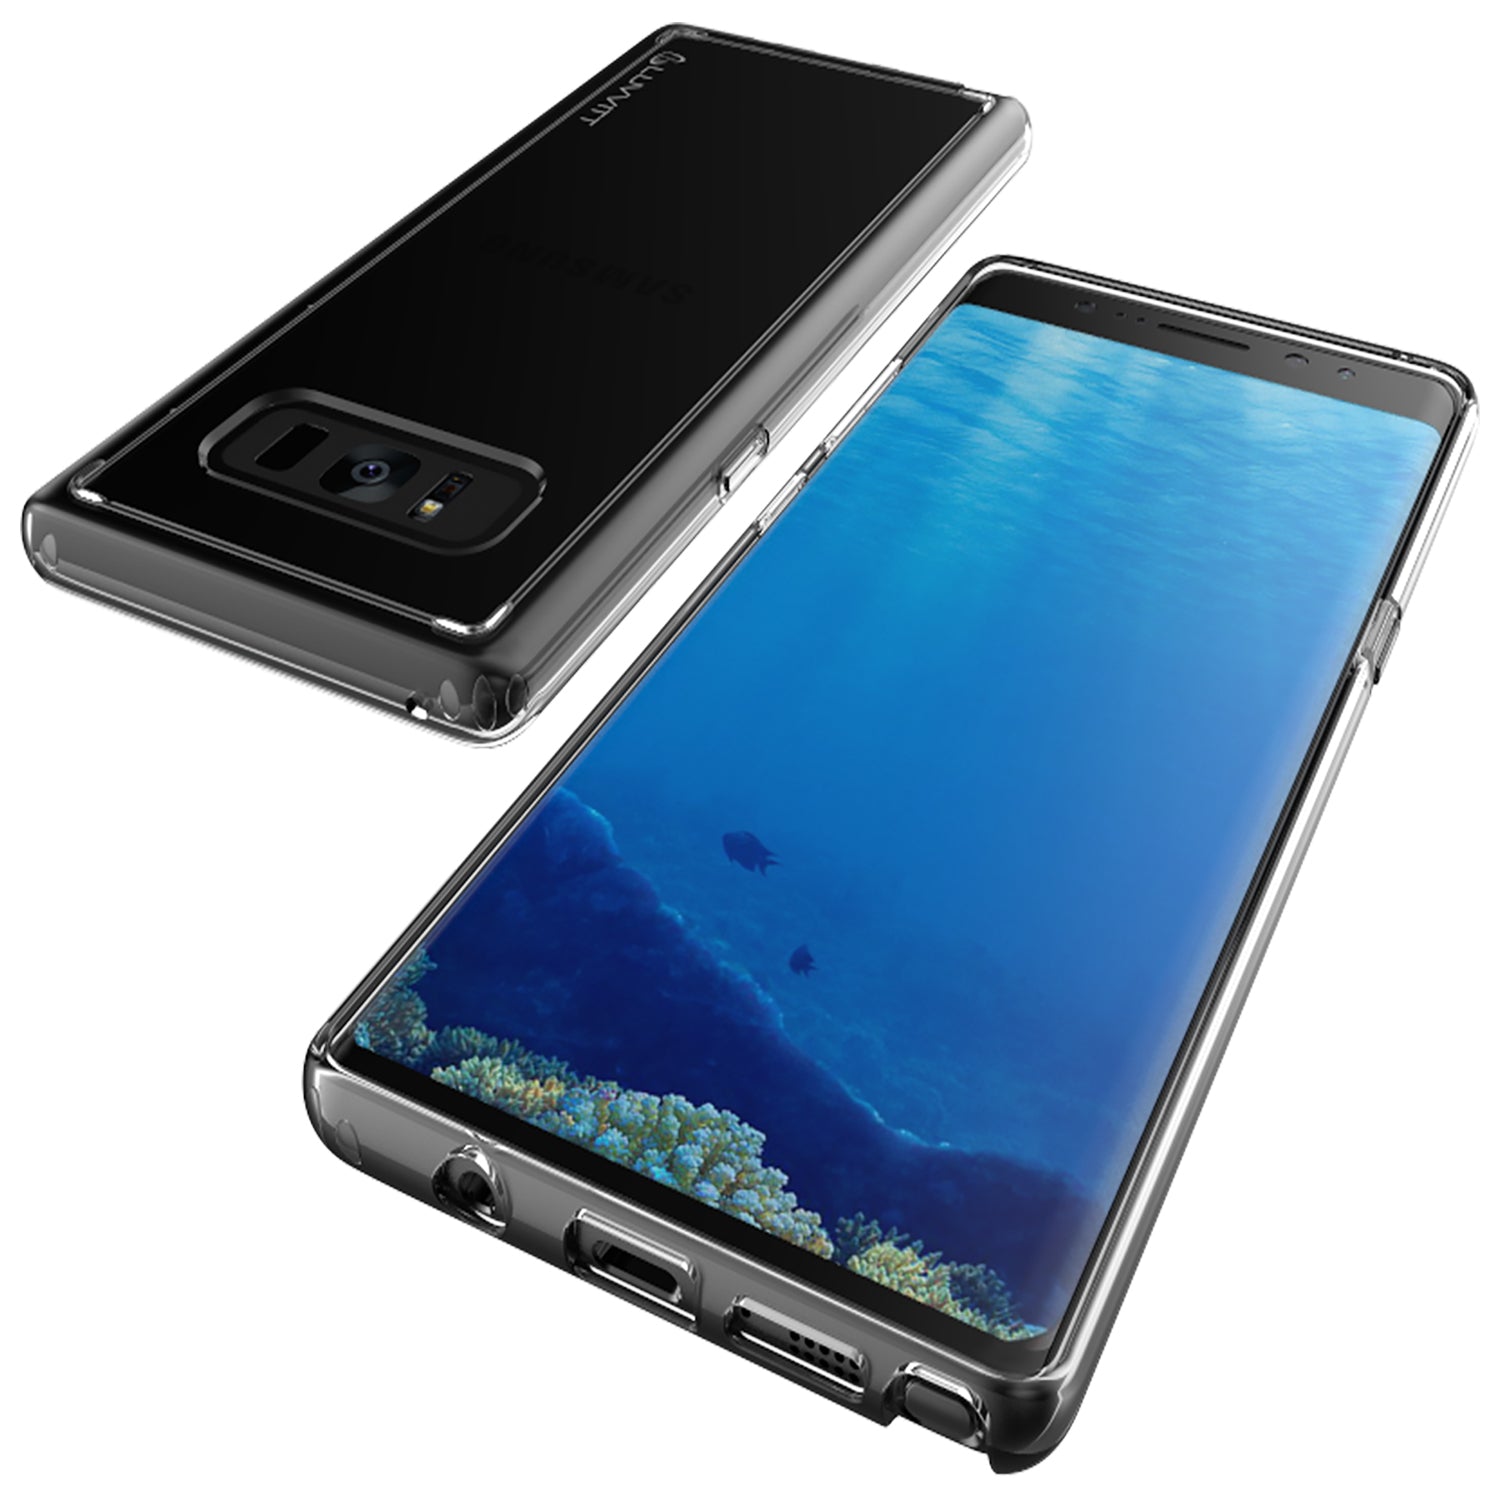 LUVVITT CLEAR VIEW Hybrid Case for Galaxy Note 8 - Crystal Clear